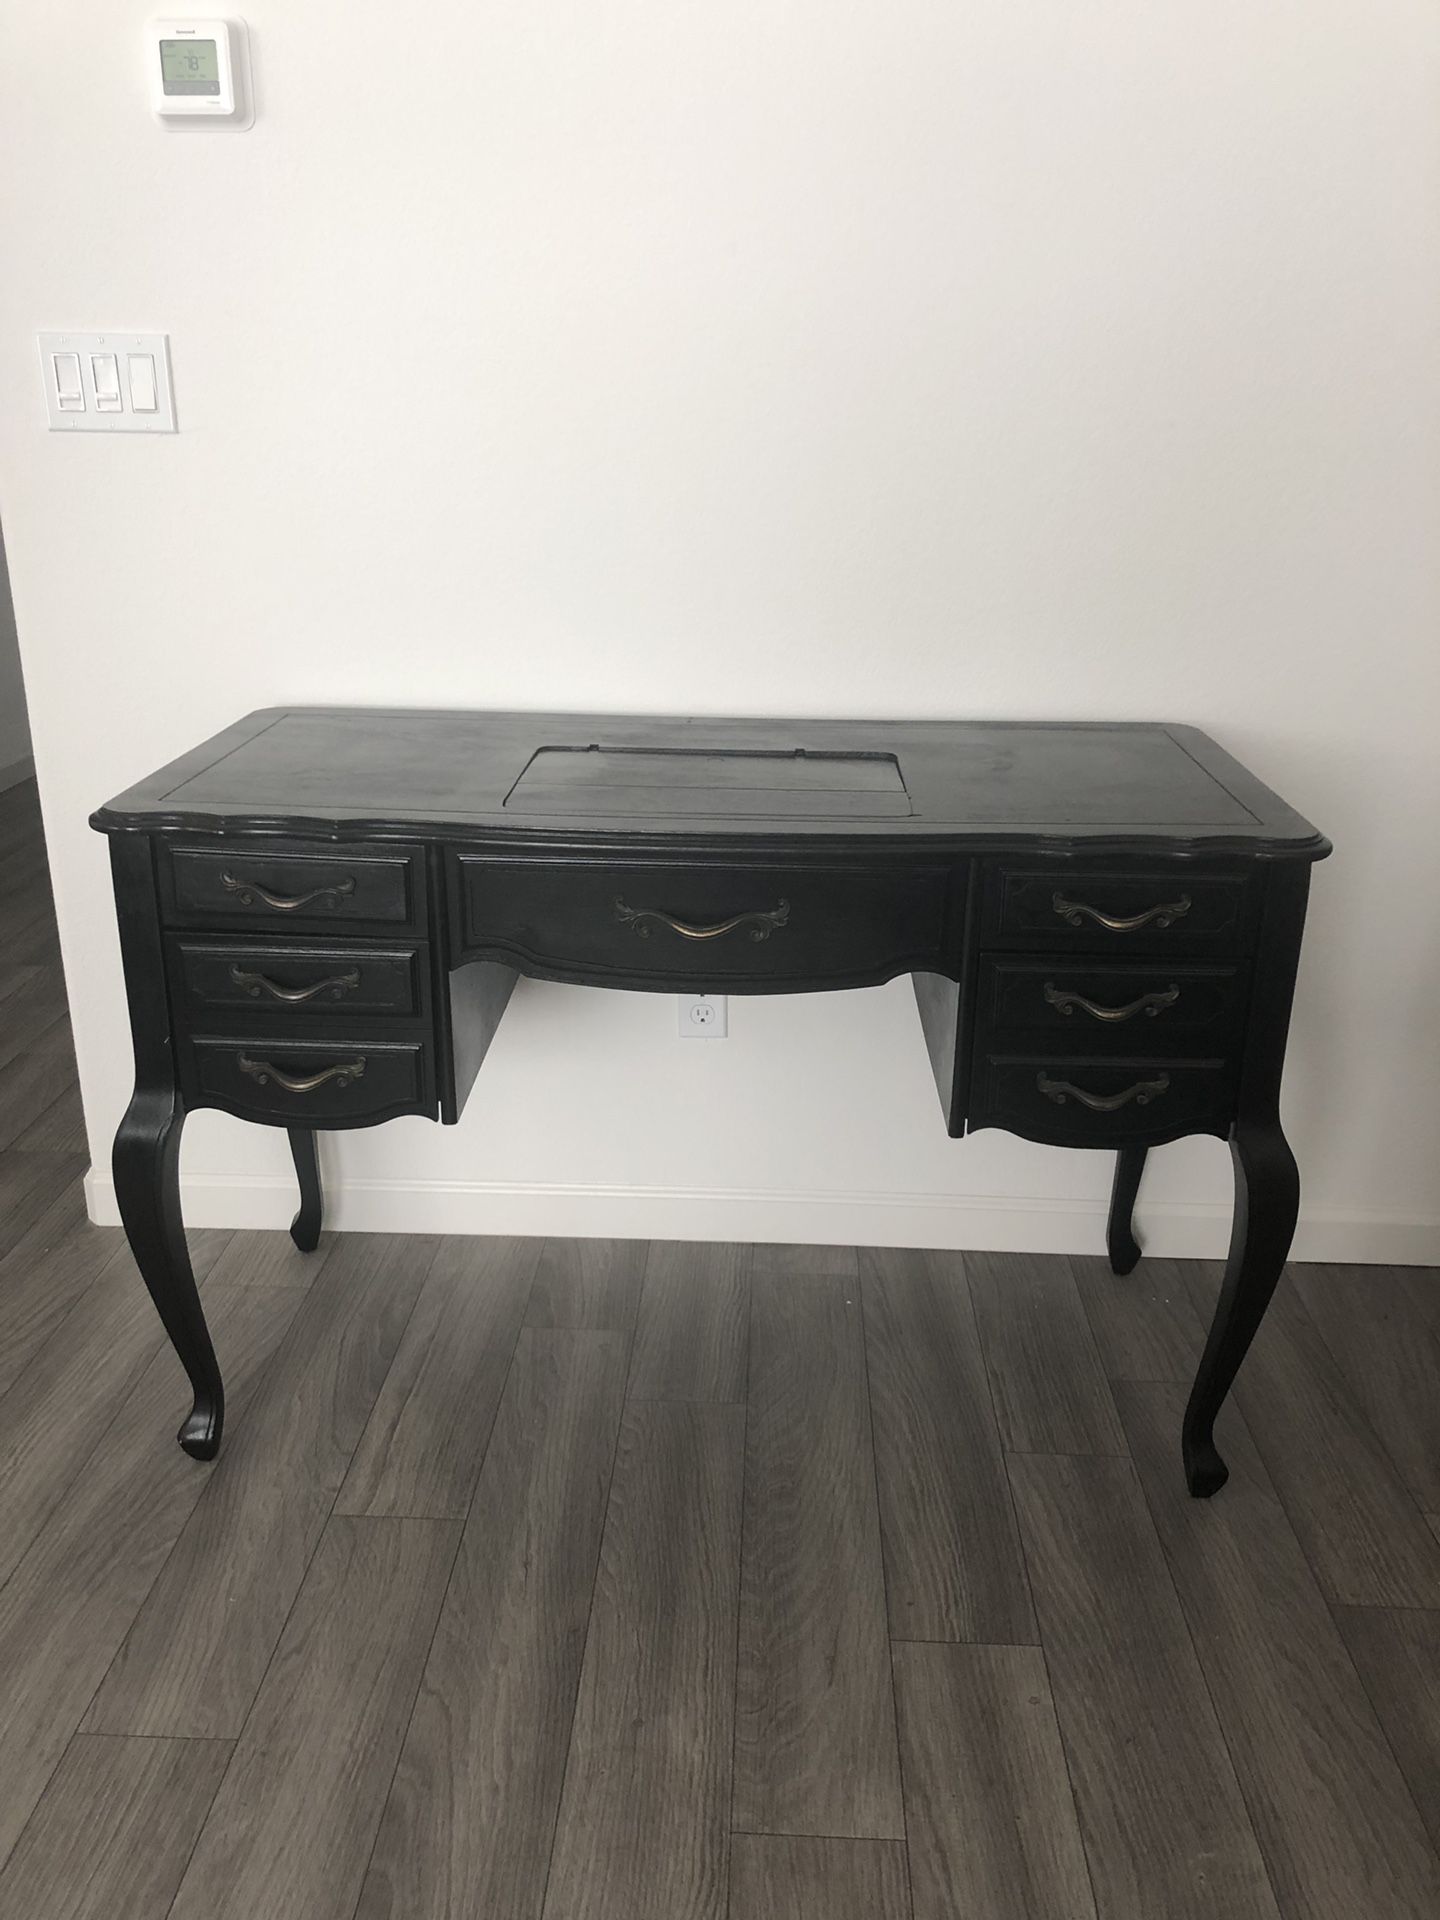 Sewing table/ Console table/ Accent table